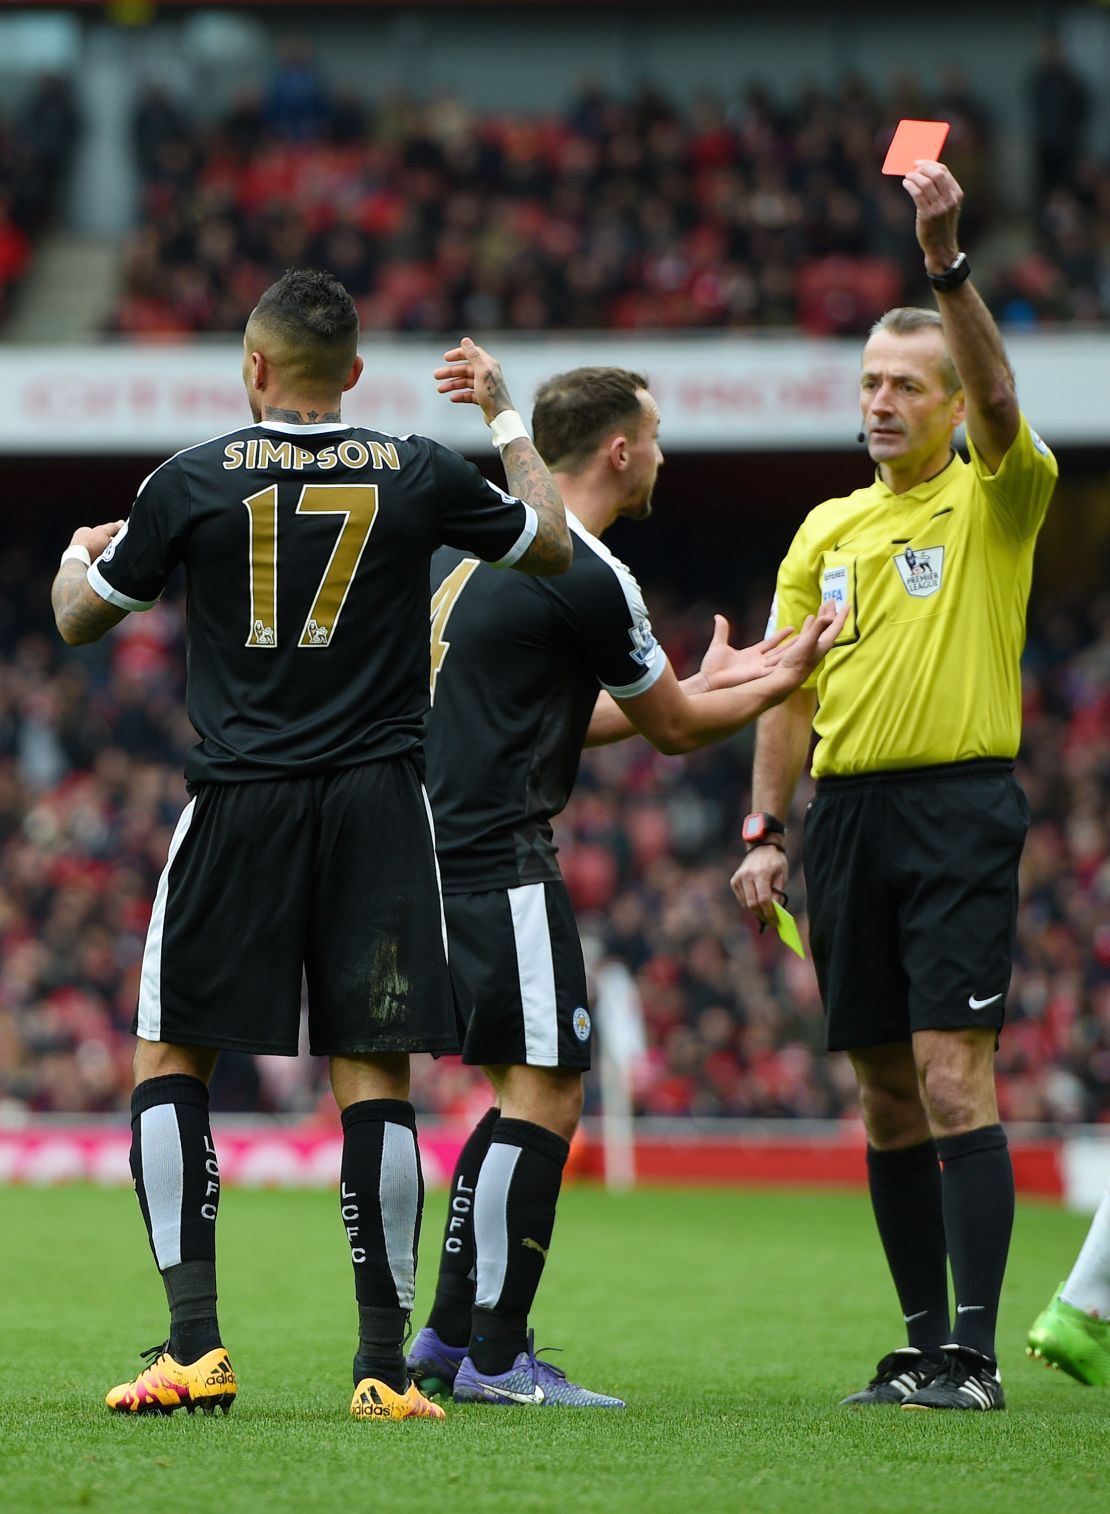 A pivotal moment in the title race? Referee Martin Atkinson shows a red card to Danny Simpson for a second yellow card foul.